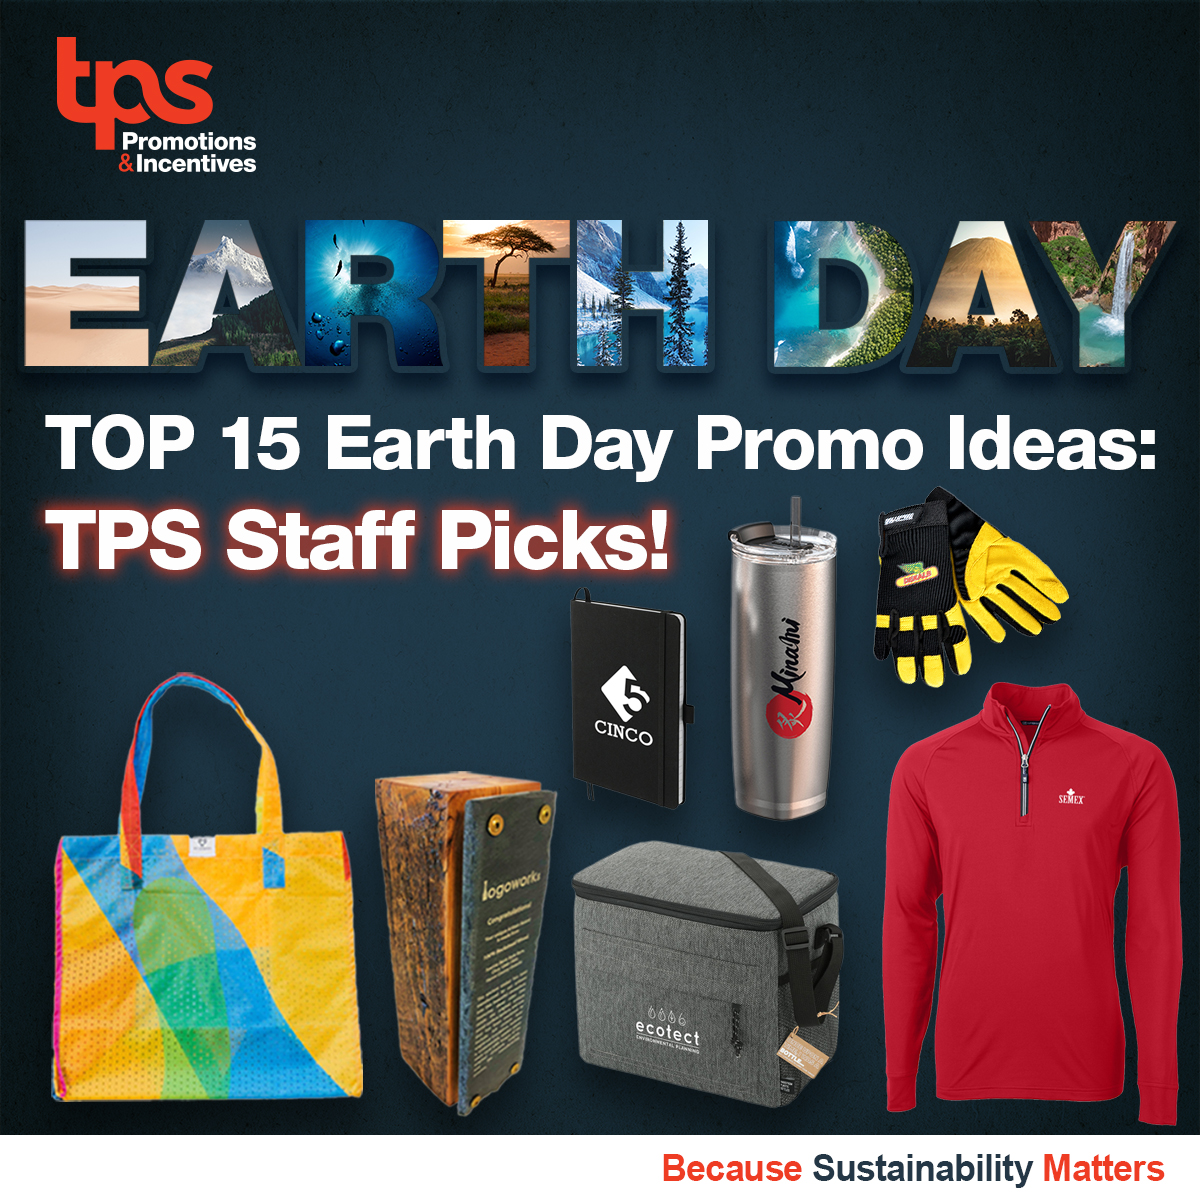 Celebrate Earth Day! 🌍🌱🌞 TOP 15 Earth Day Promo Ideas: TPS Staff Picks! tpscan.com/top-15-earth-d… Let's shop eco-friendly and support sustainable products that minimize our impact on the environment. #ecofriendly #ecofriendlyproducts #earthday2023 #sustainability